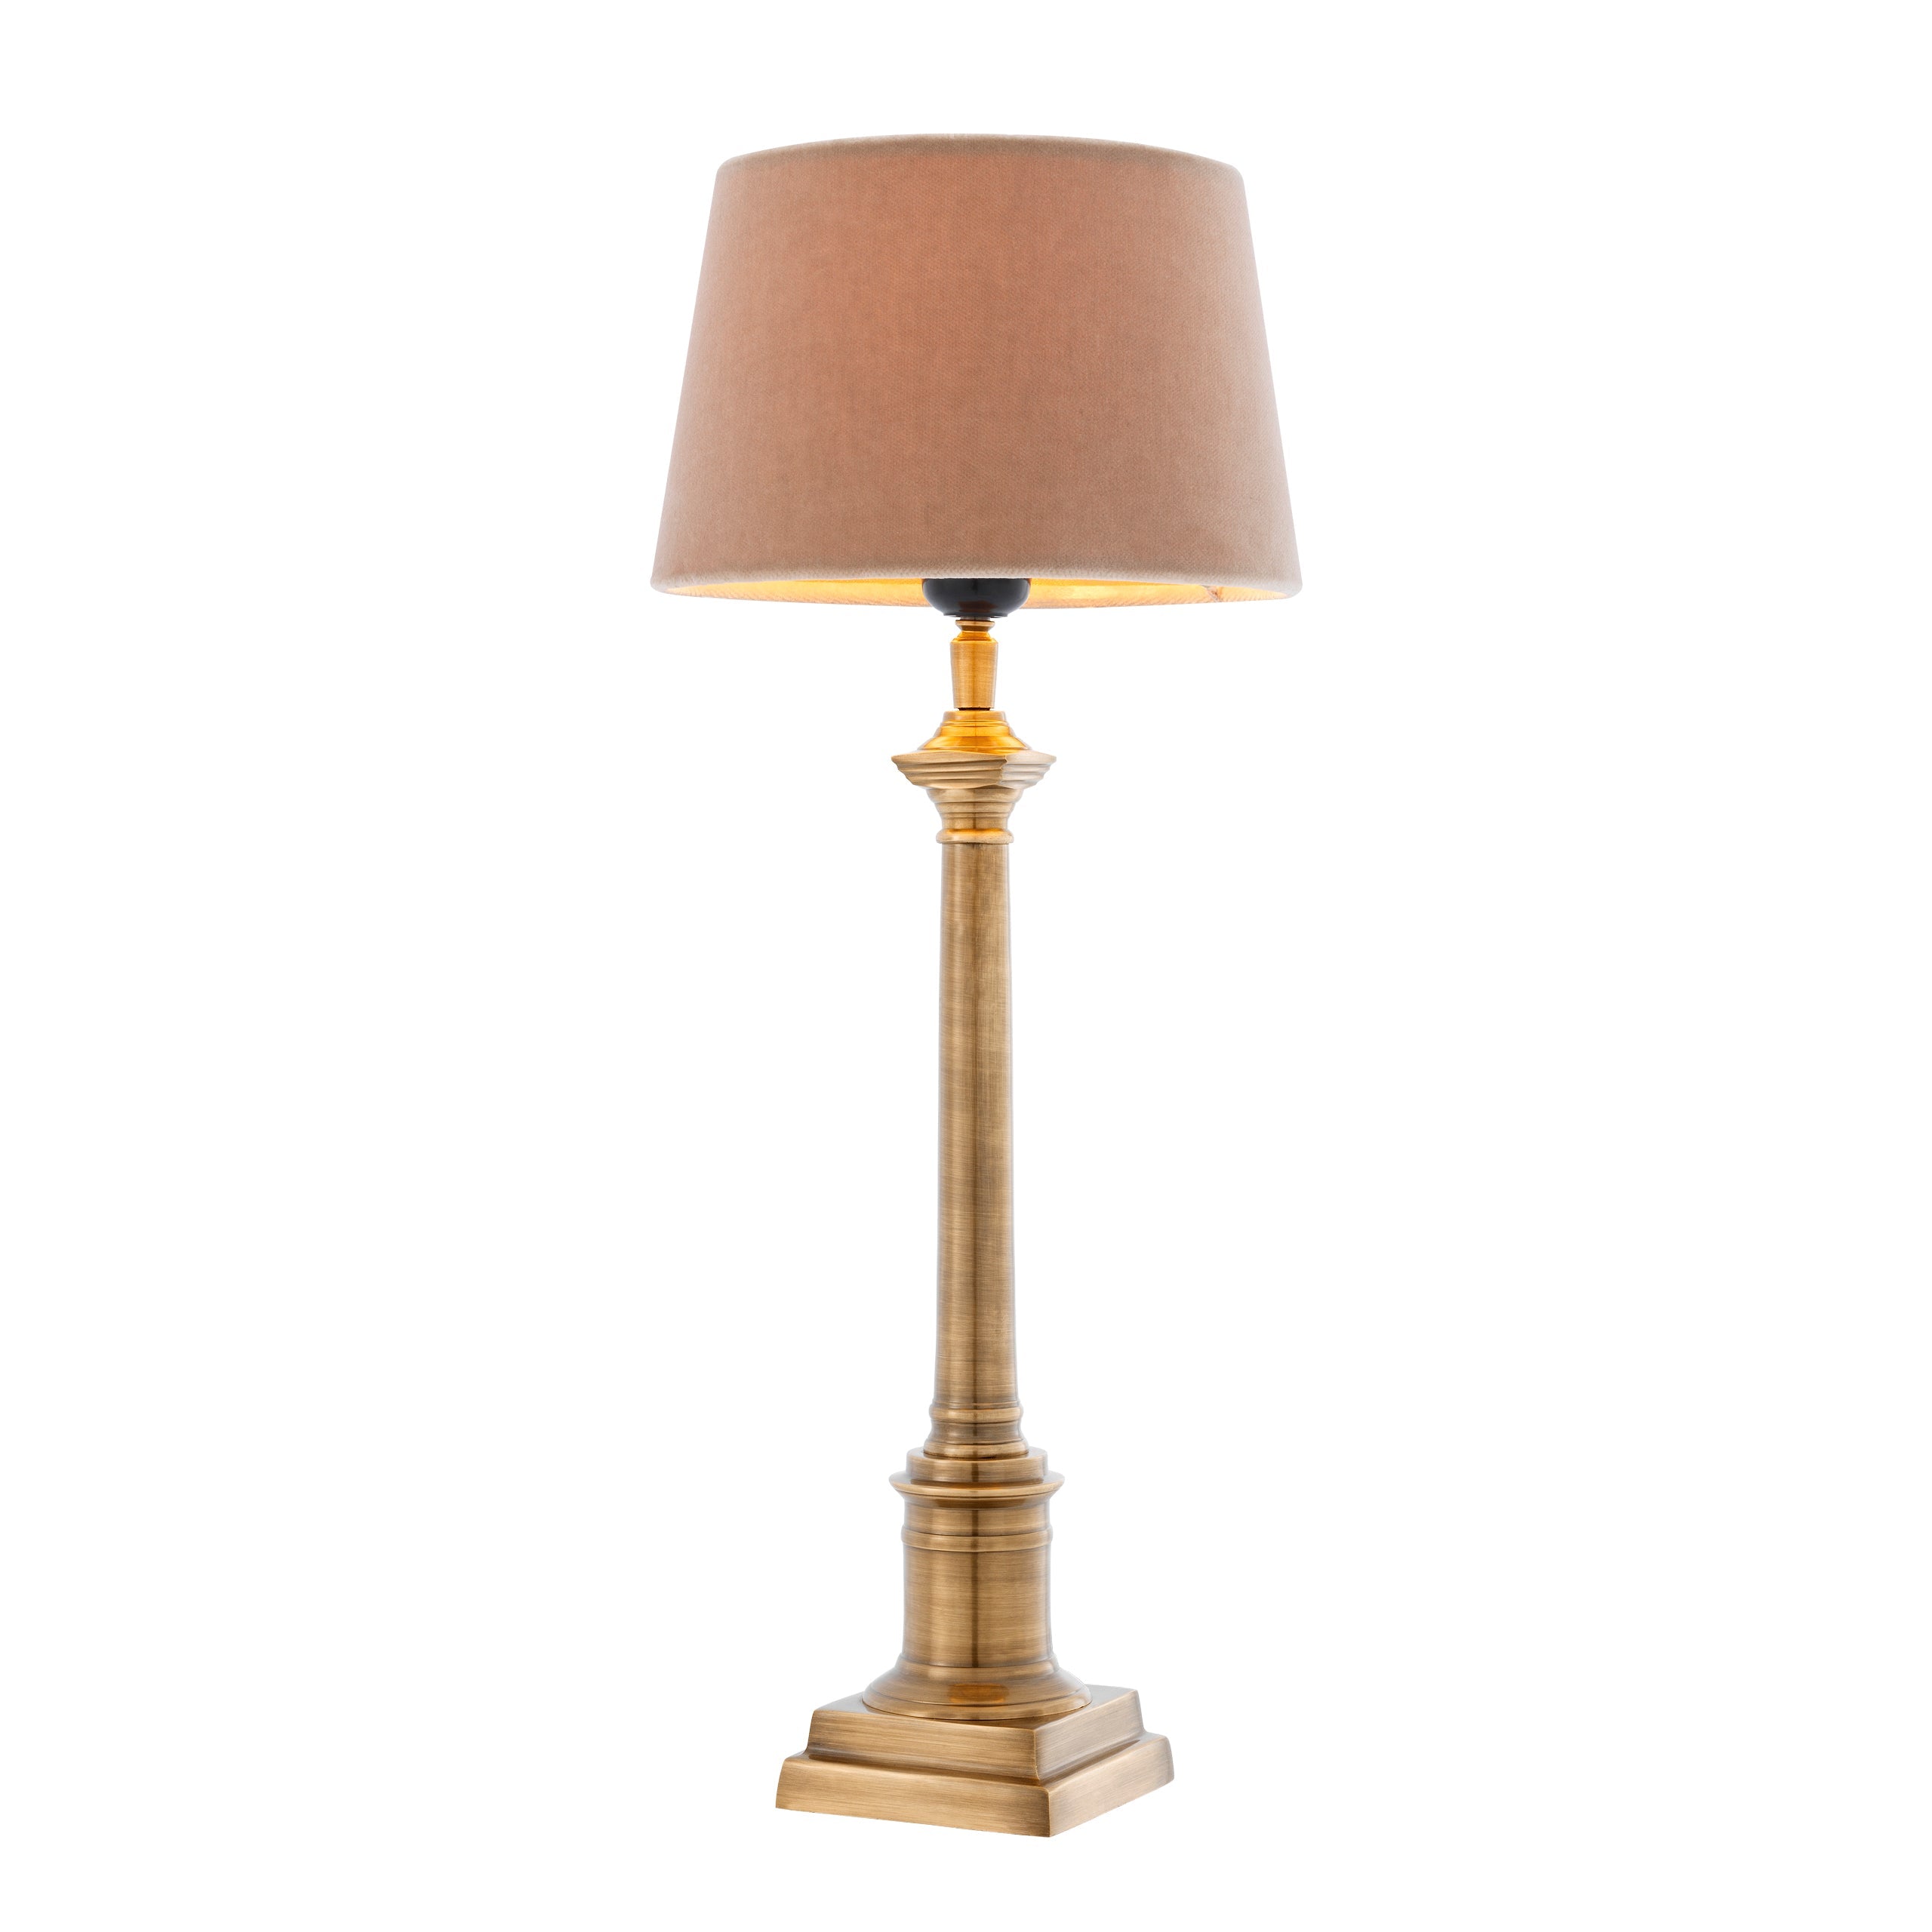 Eichholtz Cologne S Table Lamp Antique Brass Finish Inc Shade Outlet